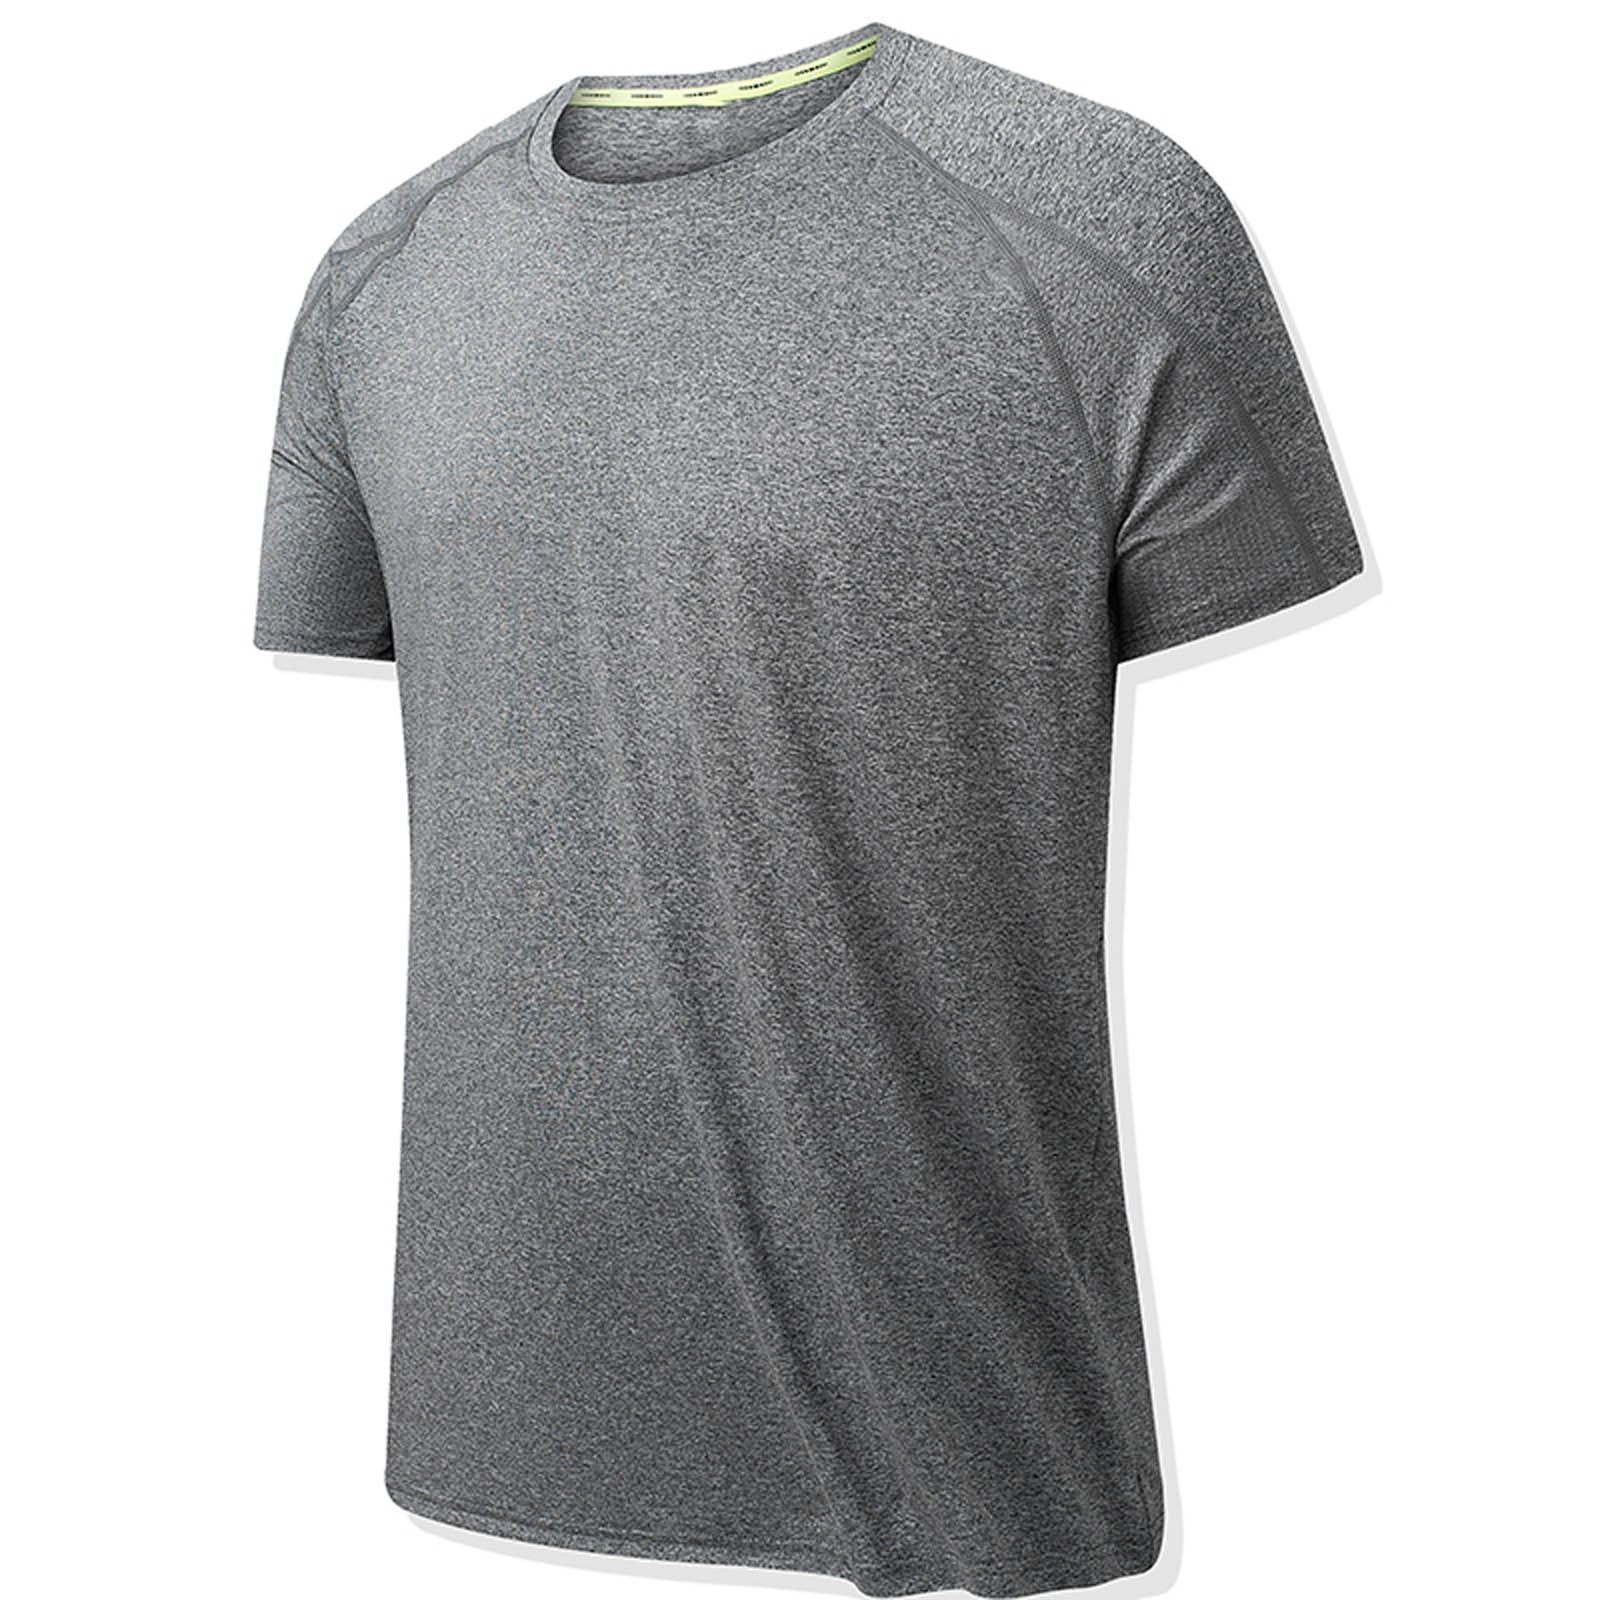 Mens T Shirts Quick Dry Running Shirts Gym Athletic T-Shirt Breathable ...